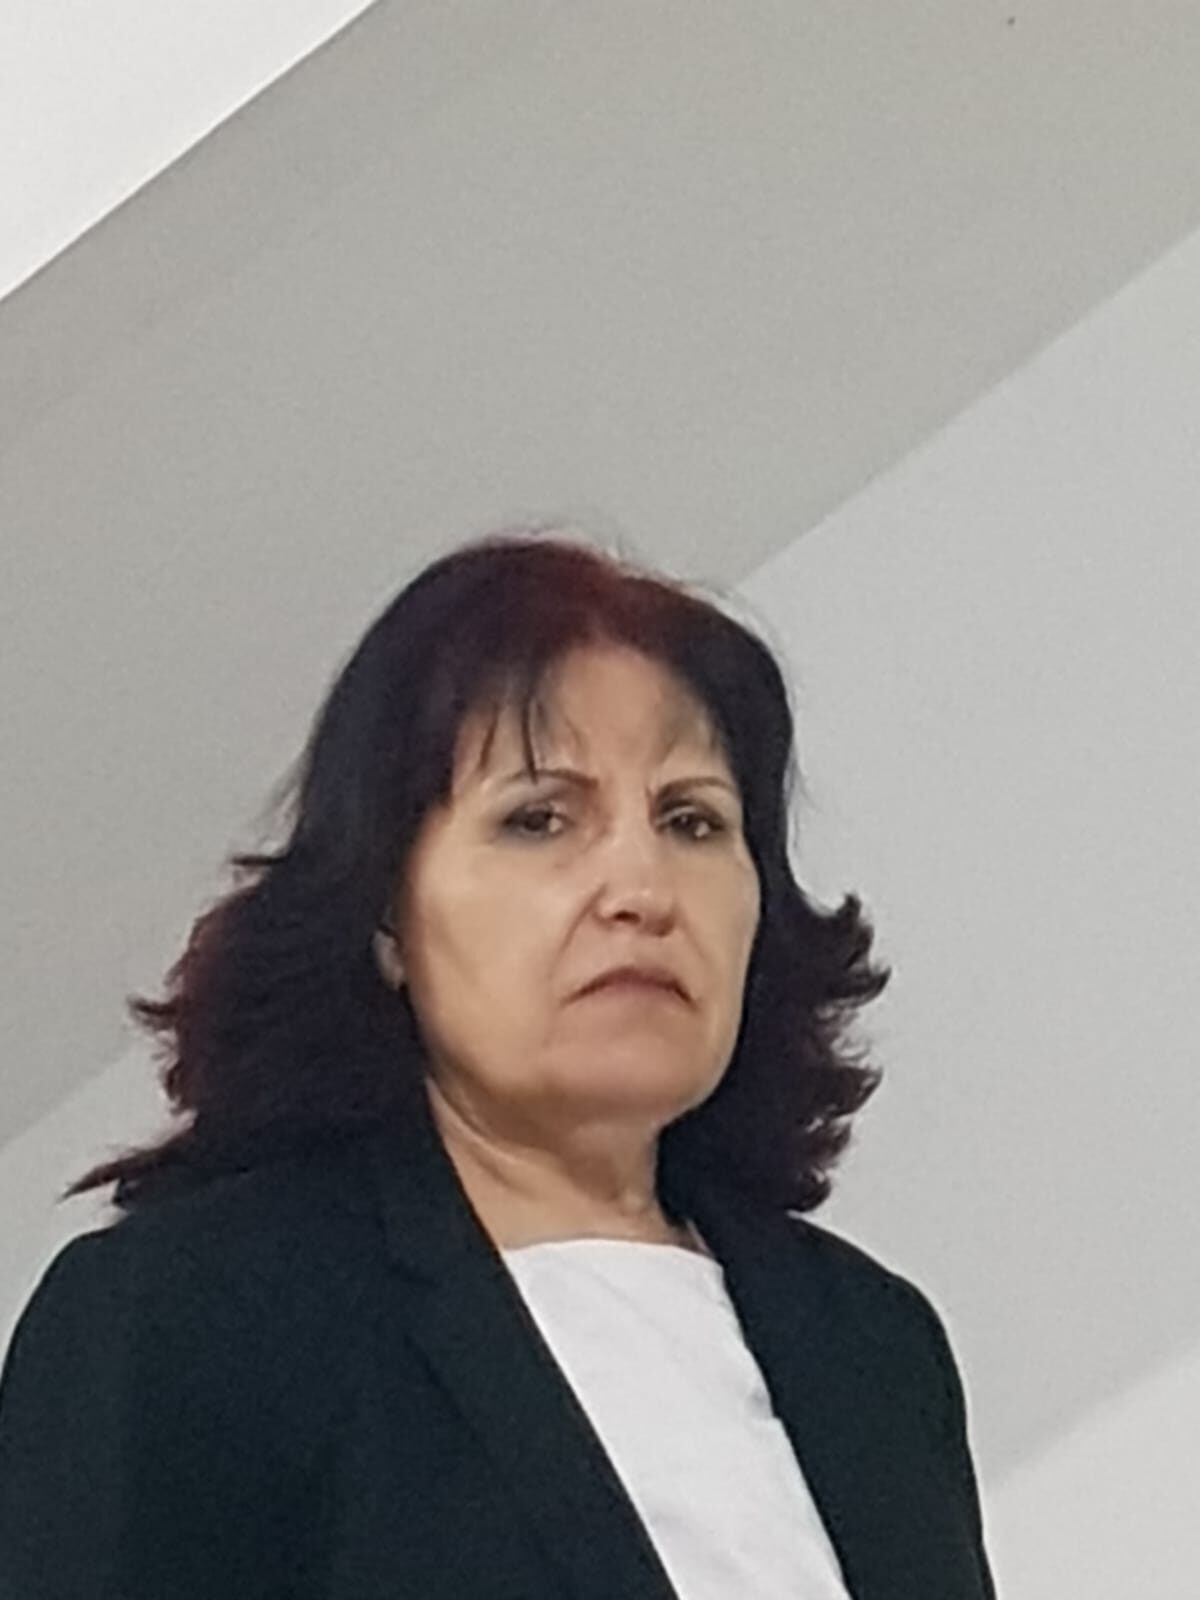 Esther Admon, chair of the Israel Association of Biochemists, Microbiologists and Laboratory Workers (photo: Israel Association of Biochemists, Microbiologists and Laboratory Workers)